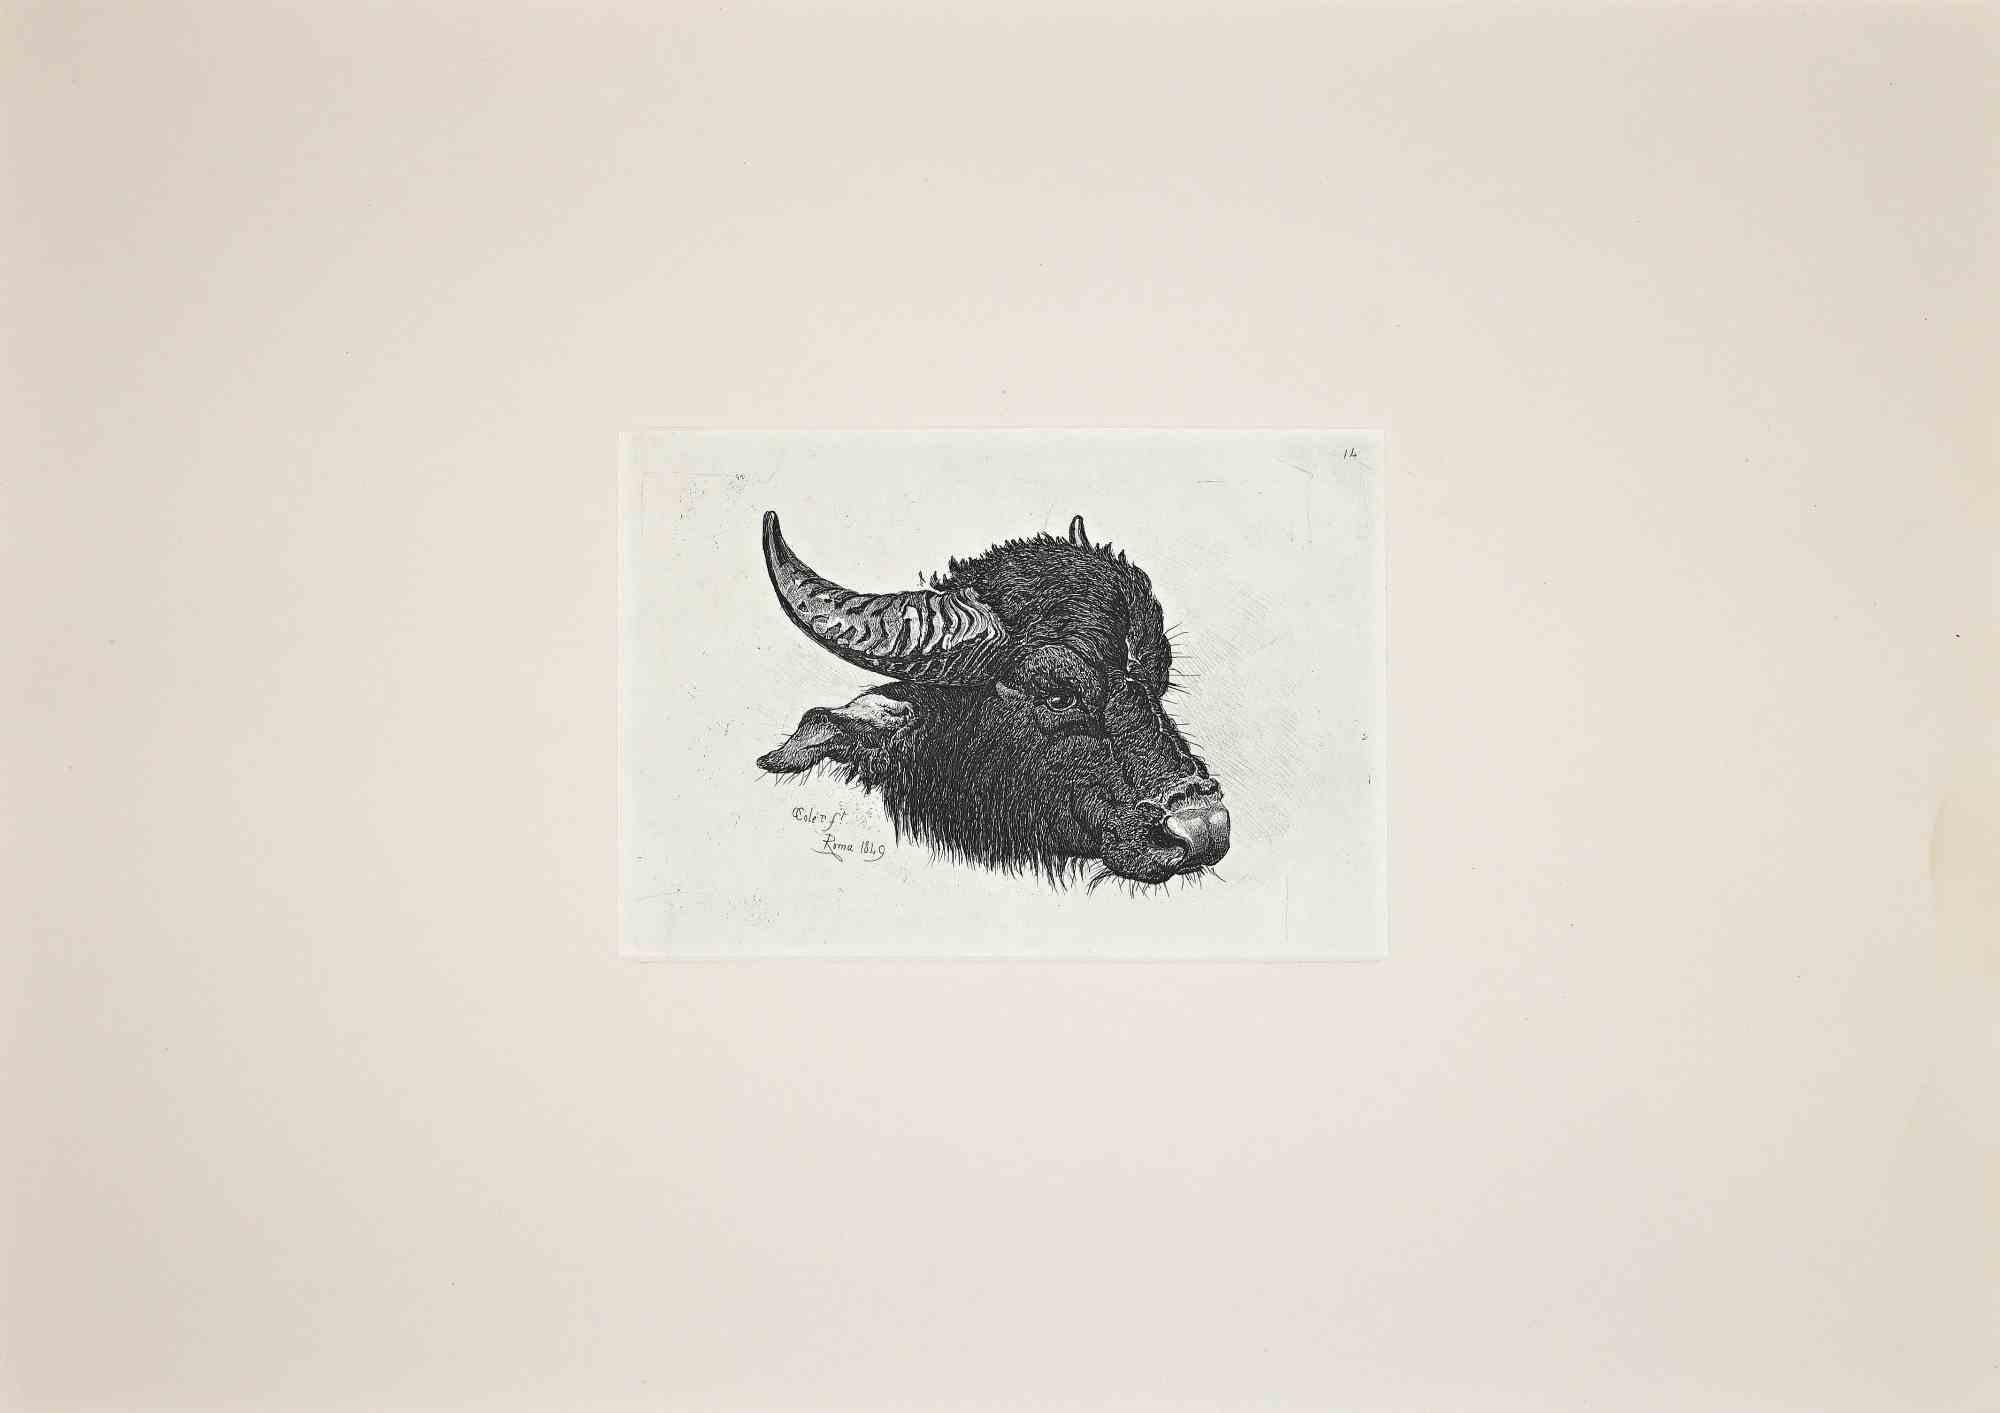 The Buffalo - Original Etching After Charles Coleman - 1992